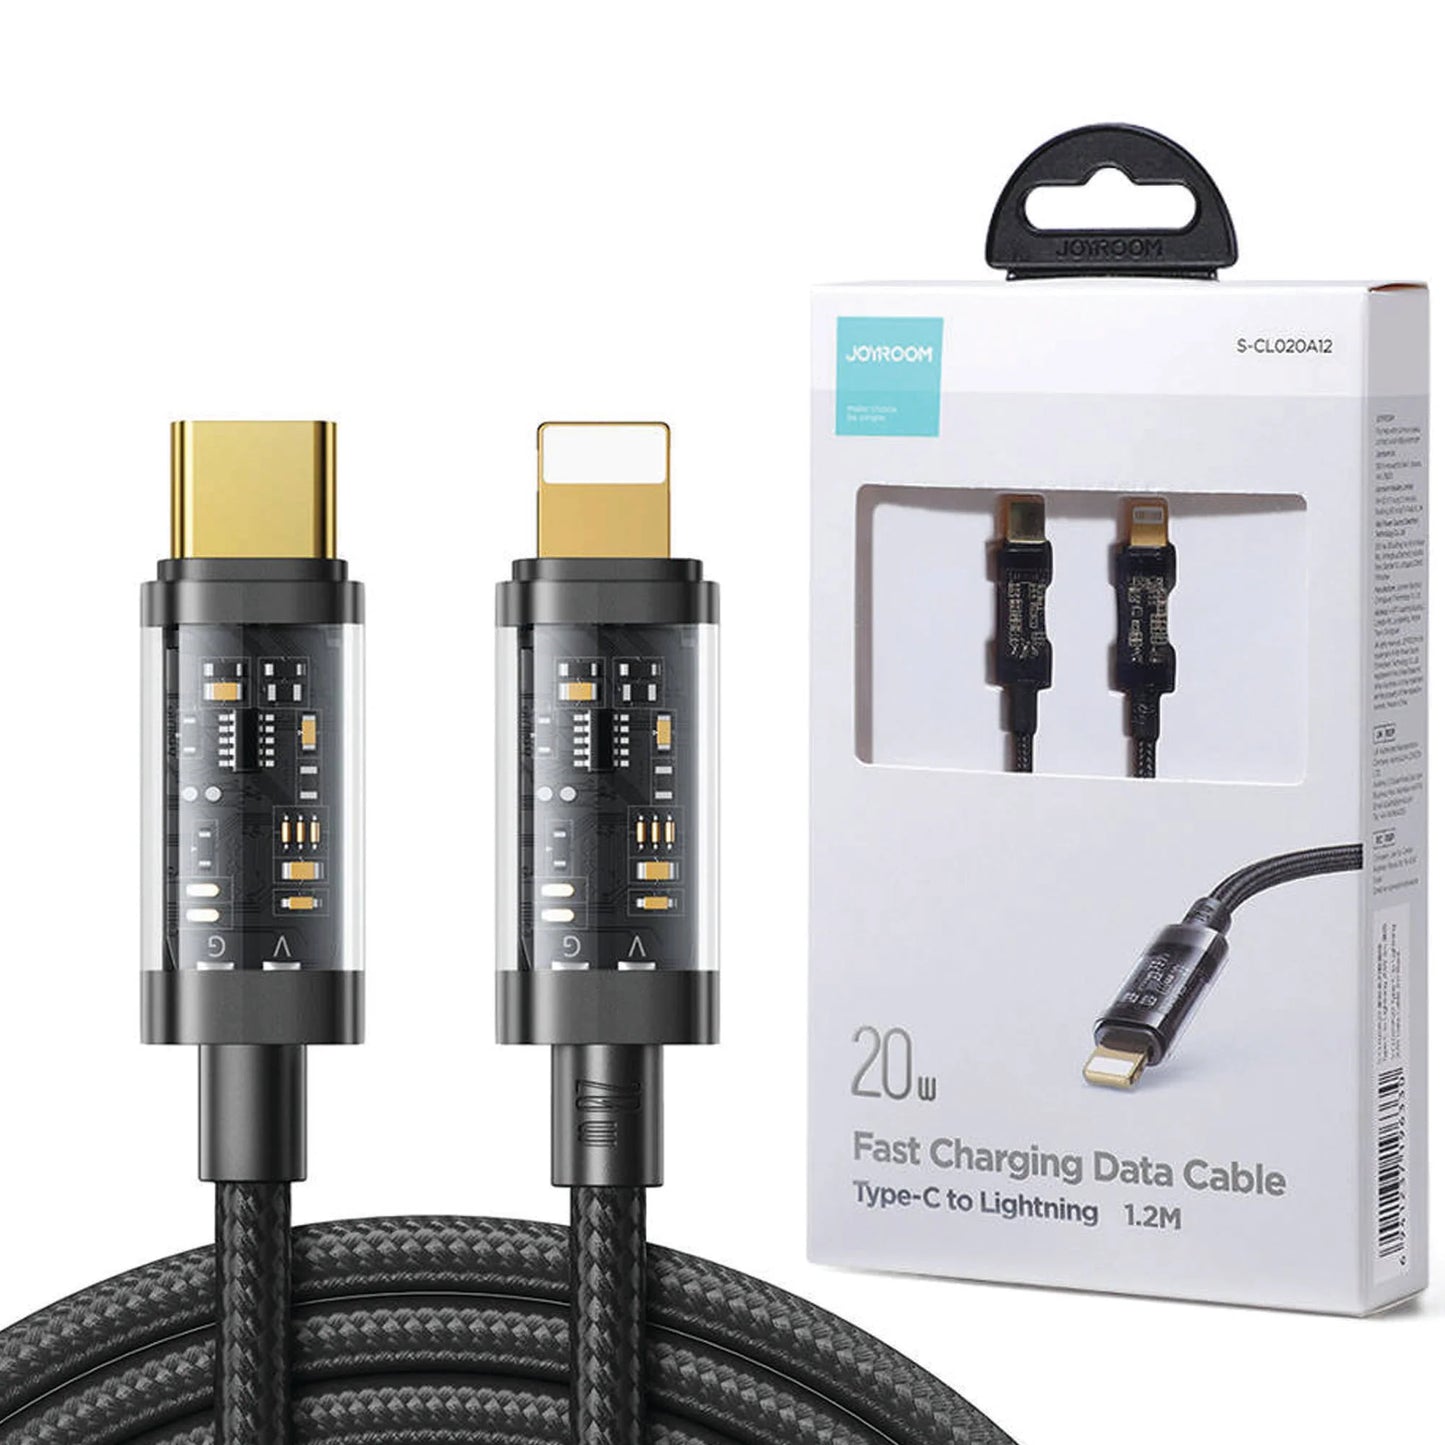 JOYROOM S-CL020A12 Type-C to Lightning 20W Data Cable 1.2m-Black